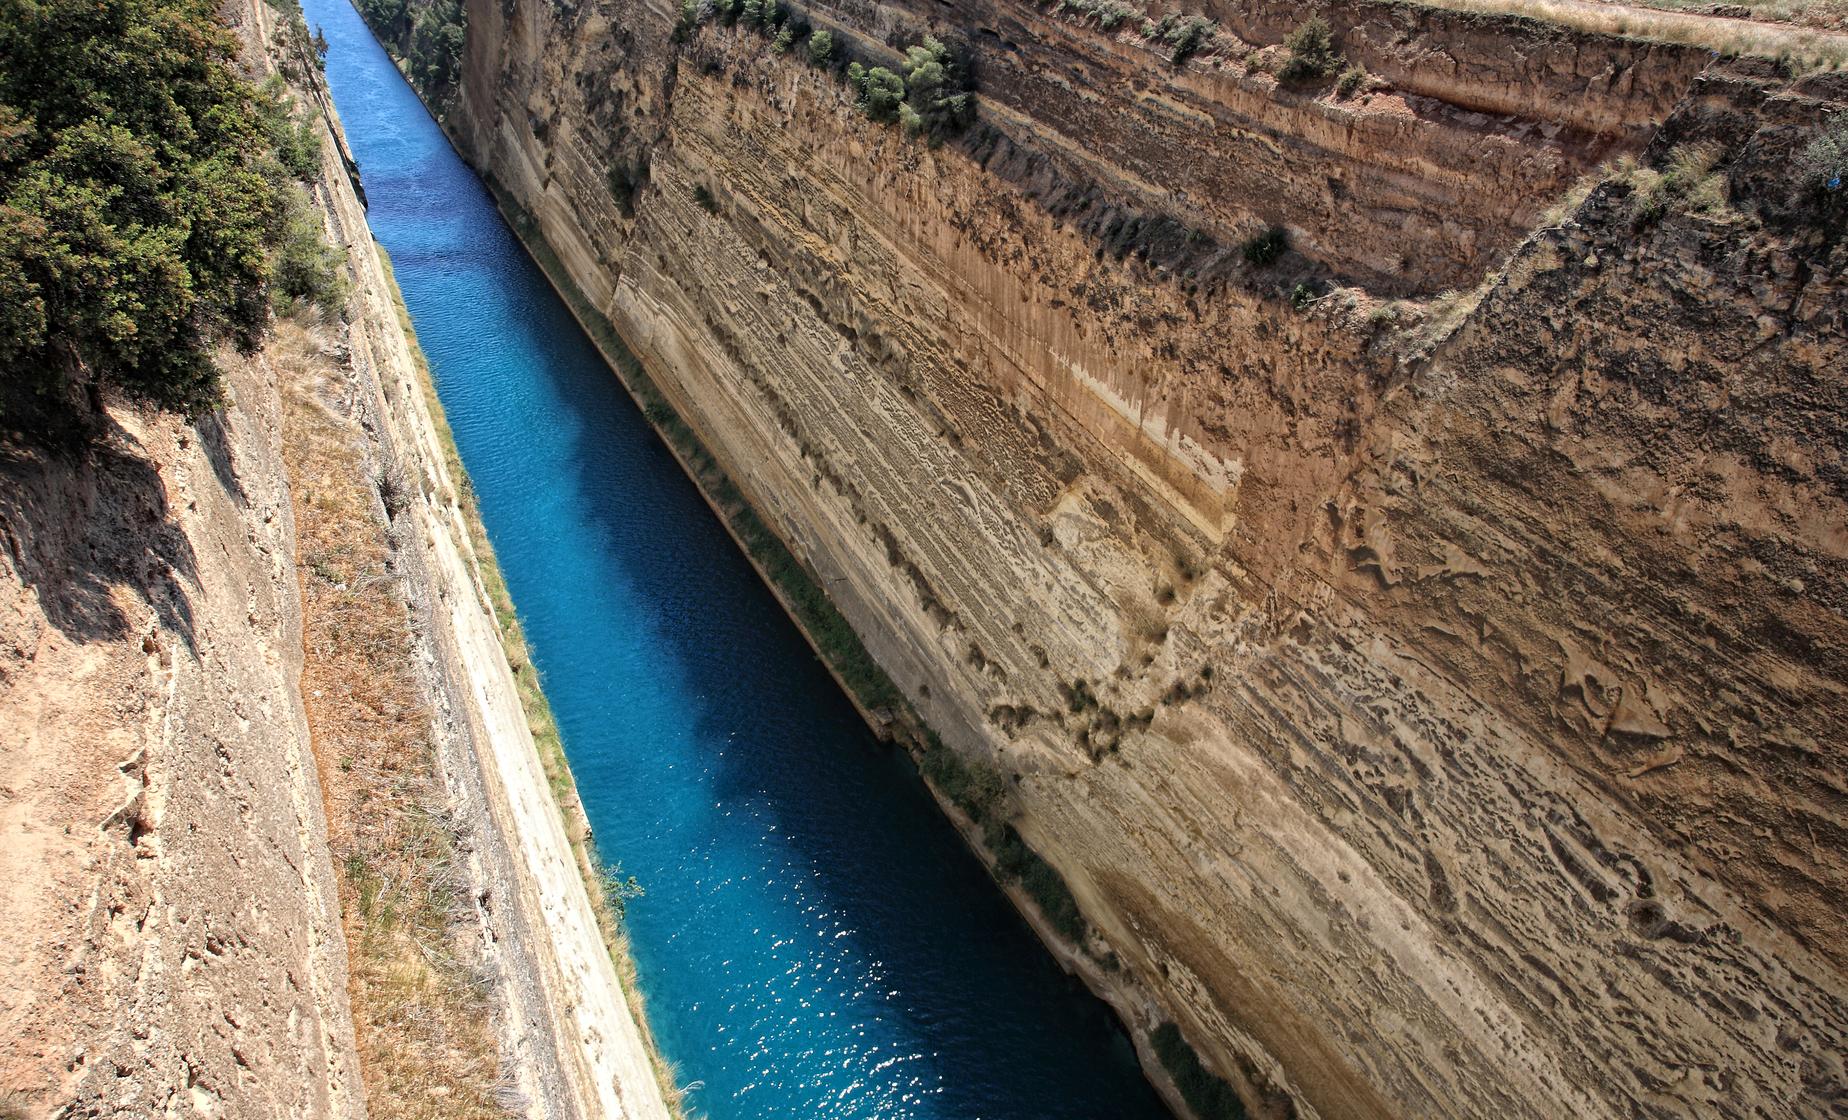 Athens Ancient Corinth Tour from Hotel (Temple of Apollo, Corinth Canal)